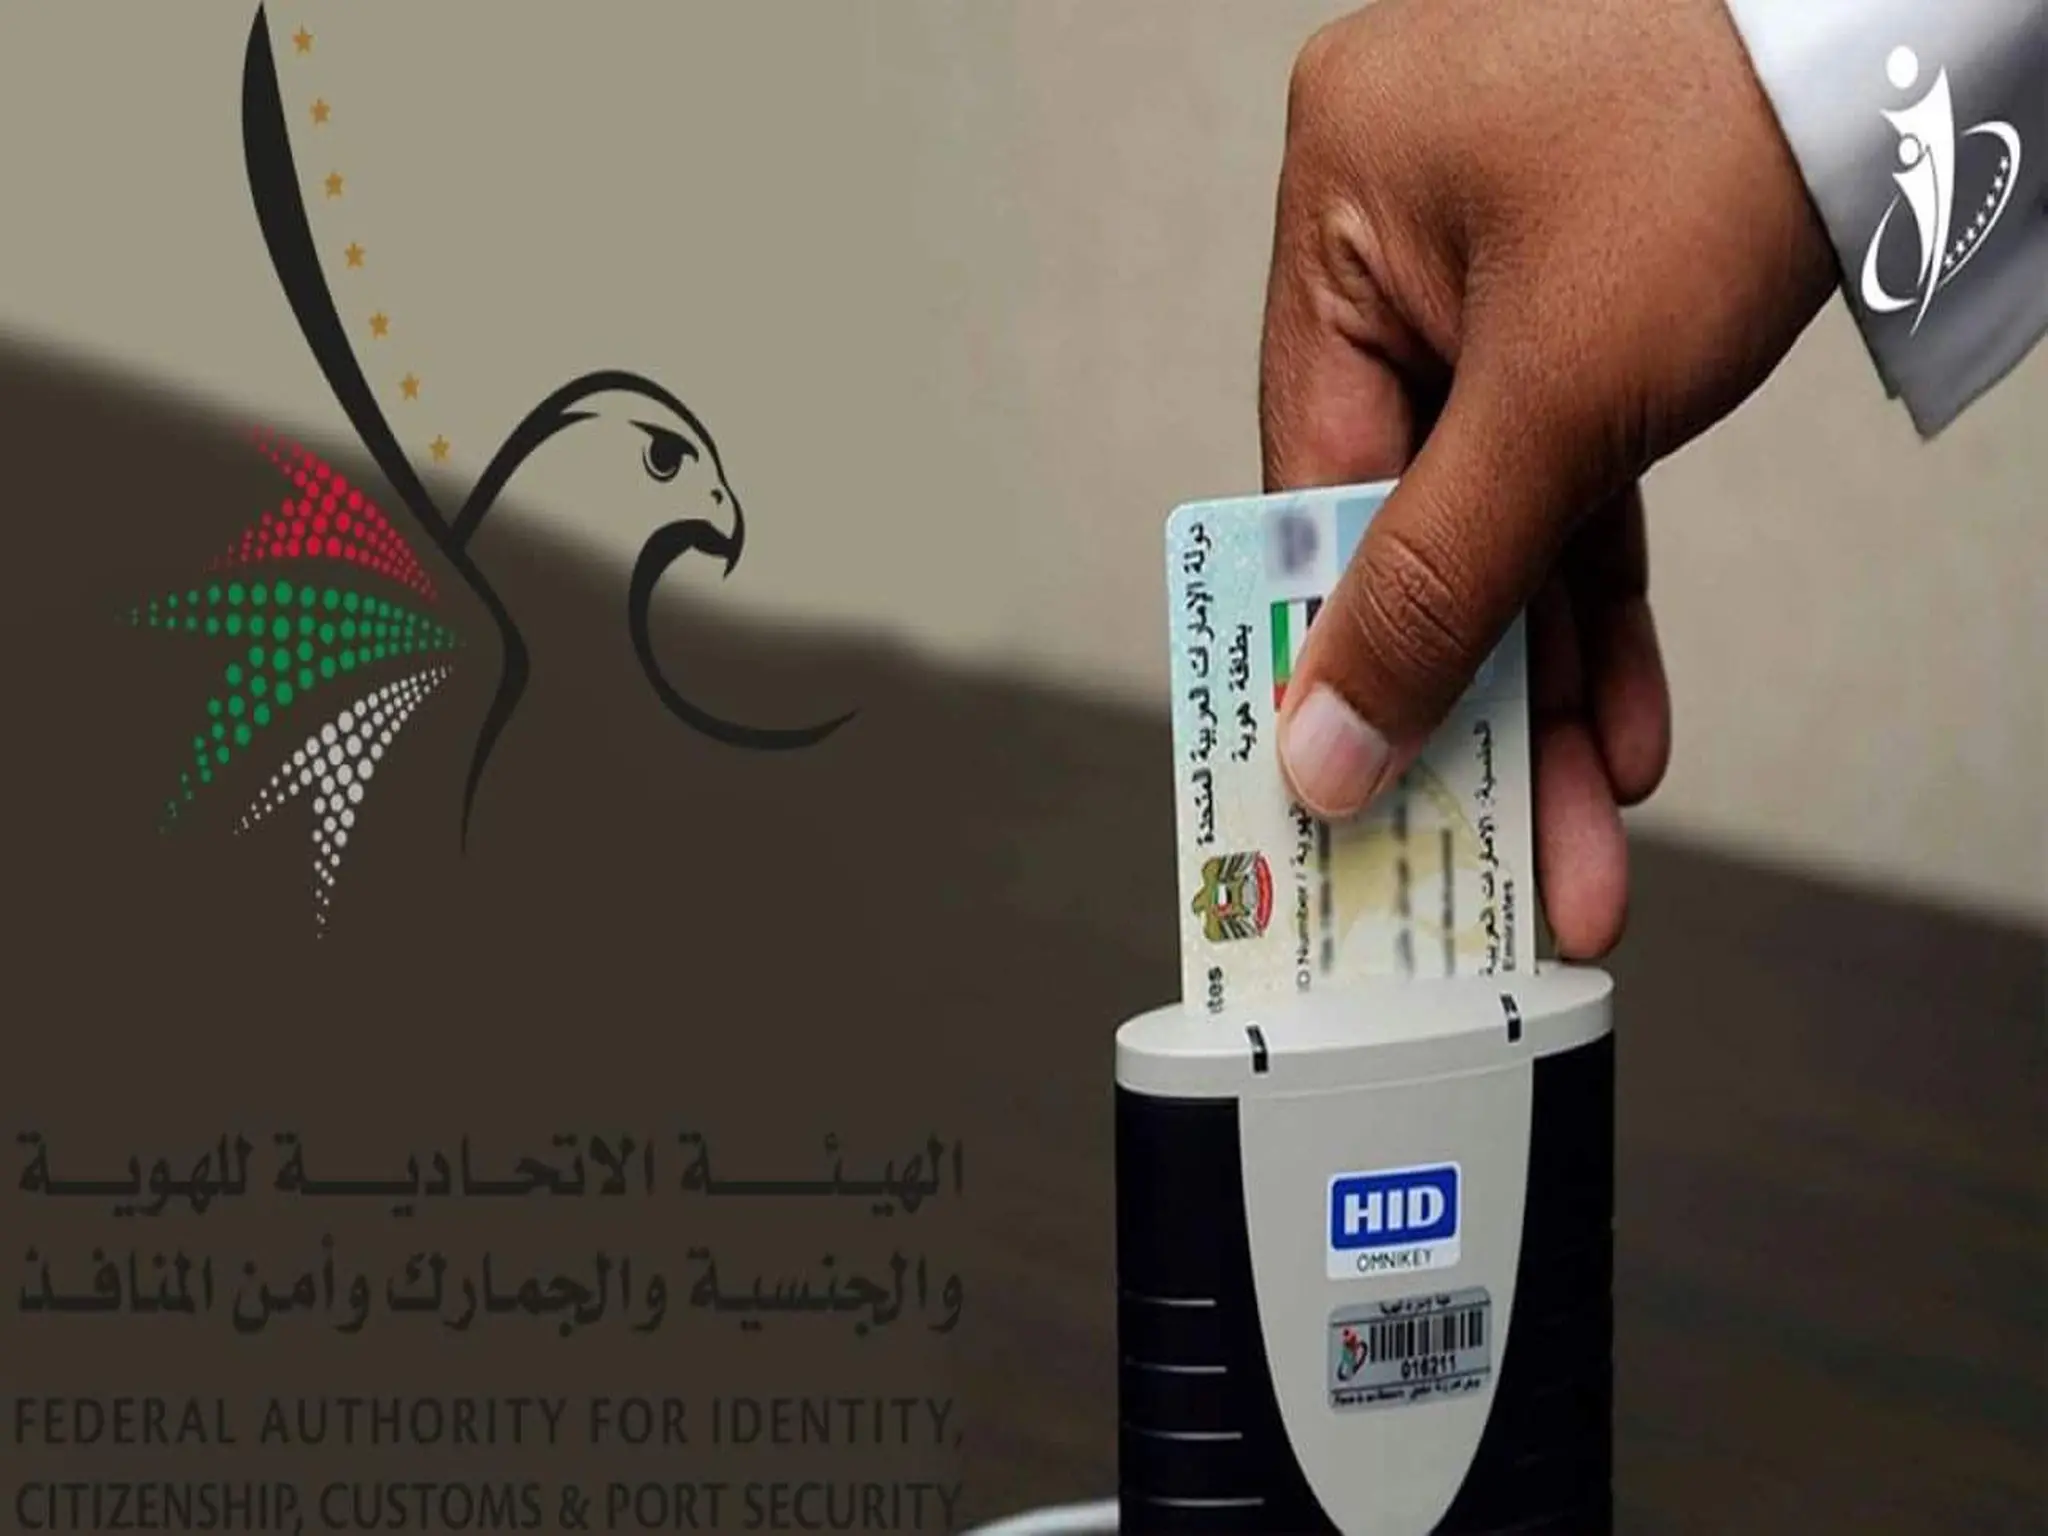 The UAE announces new procedures for residency applications starting next Monday